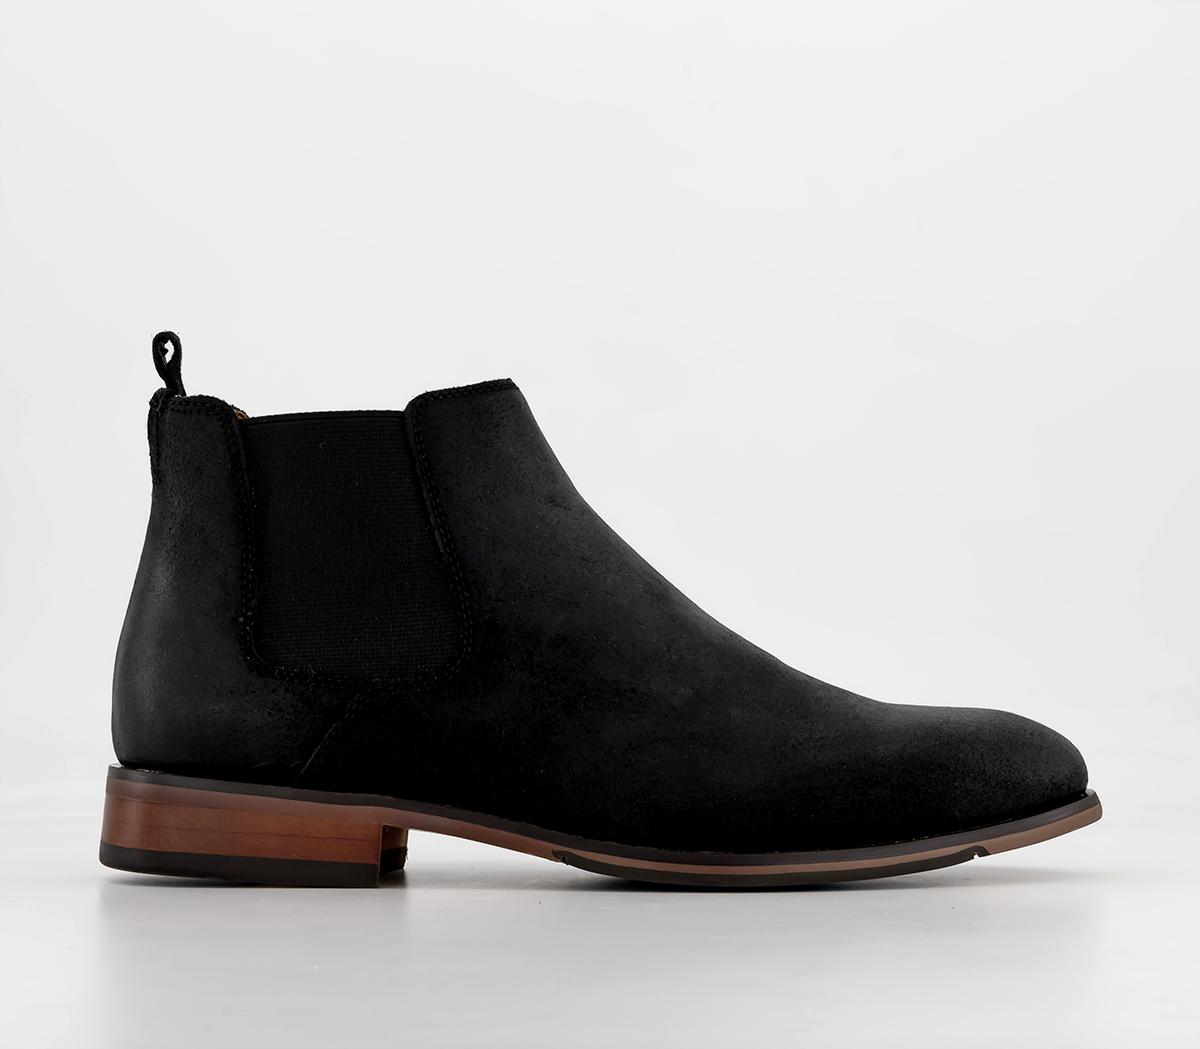 OFFICEBarkley 2 Chelsea Boots Black Waxed Suede